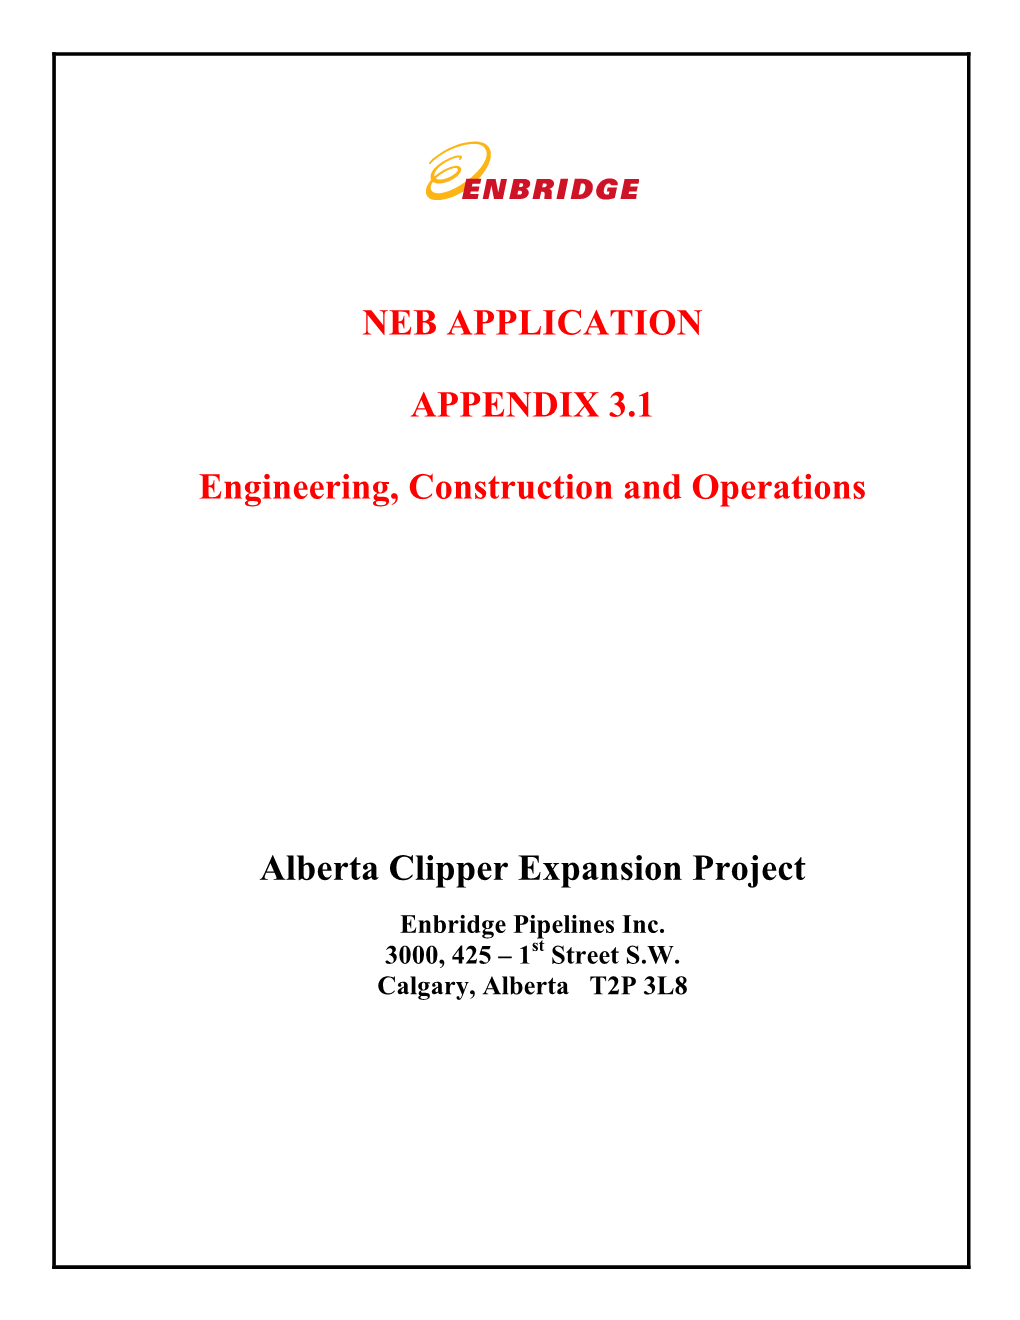 NEB APPLICATION APPENDIX 3.1 Engineering, Construction And